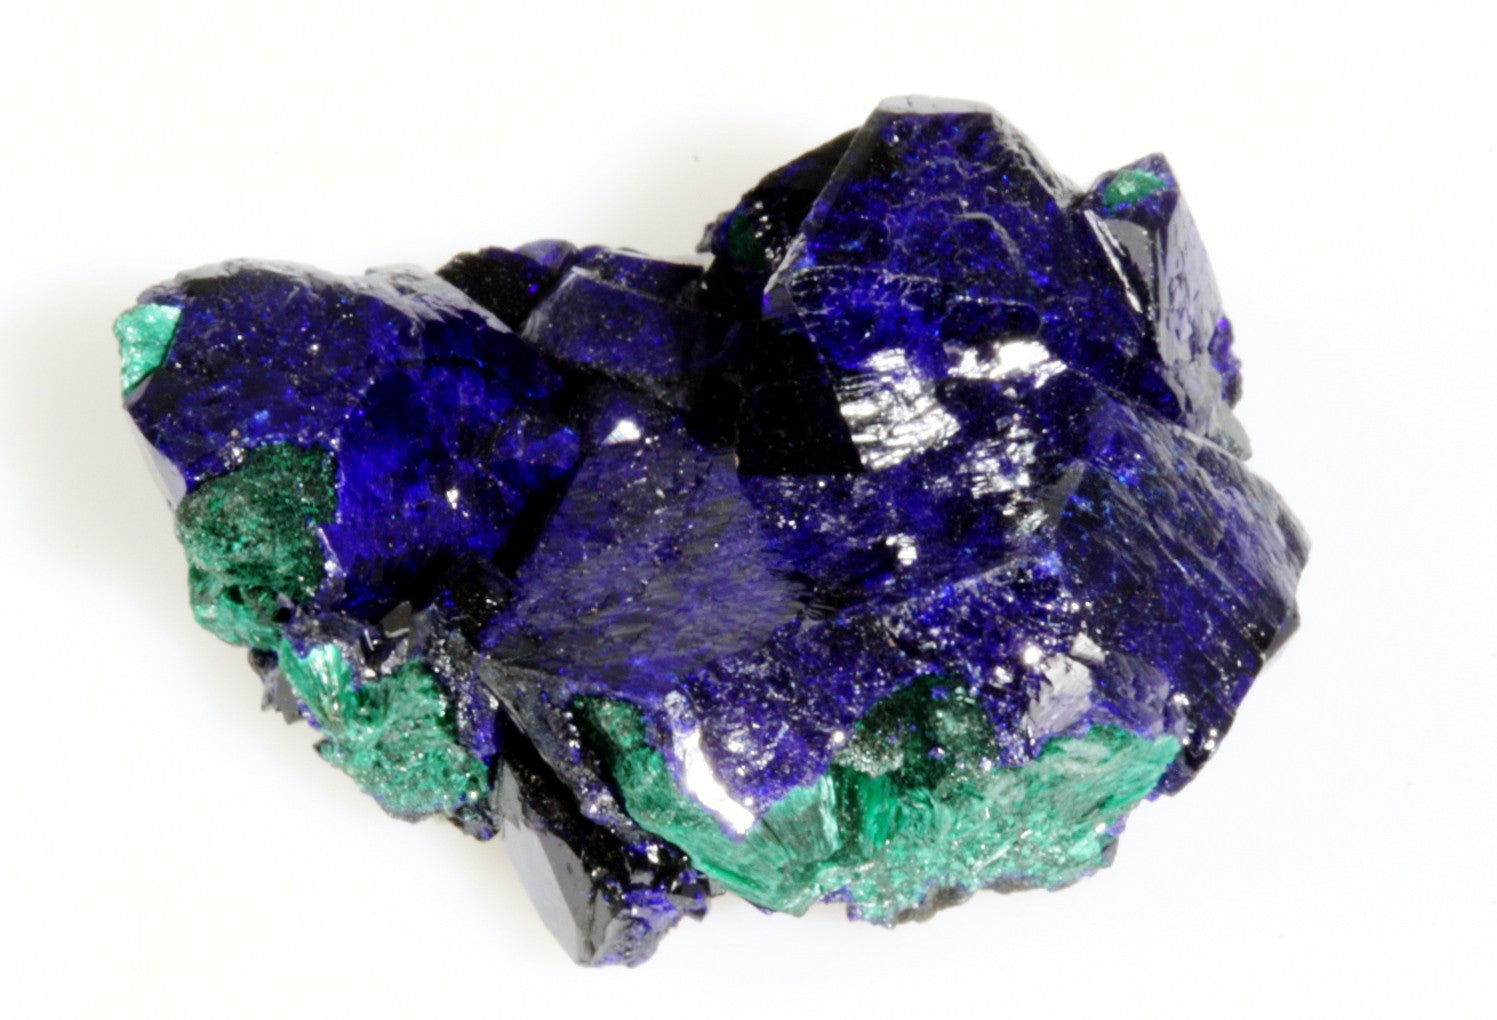 Azurite Crystal Cluster with Fibrous Malachite 1.12" x 1.00" x 0.50"